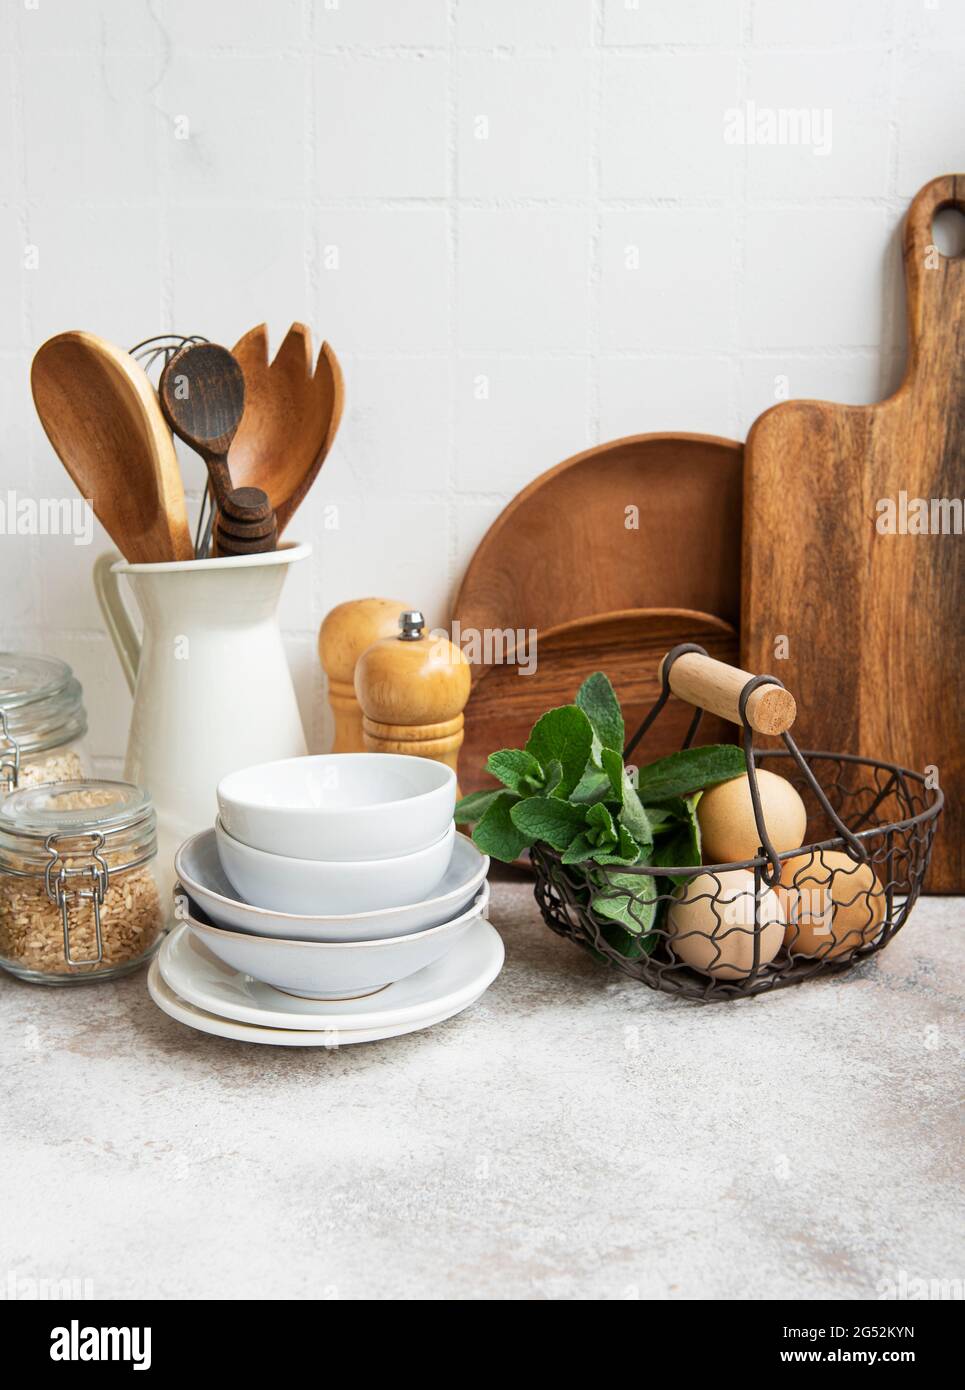 https://c8.alamy.com/comp/2G52KYN/kitchen-utensils-tools-and-dishware-on-on-the-background-white-tile-wall-interior-modern-kitchen-space-in-bright-colors-blank-space-for-a-text-fr-2G52KYN.jpg